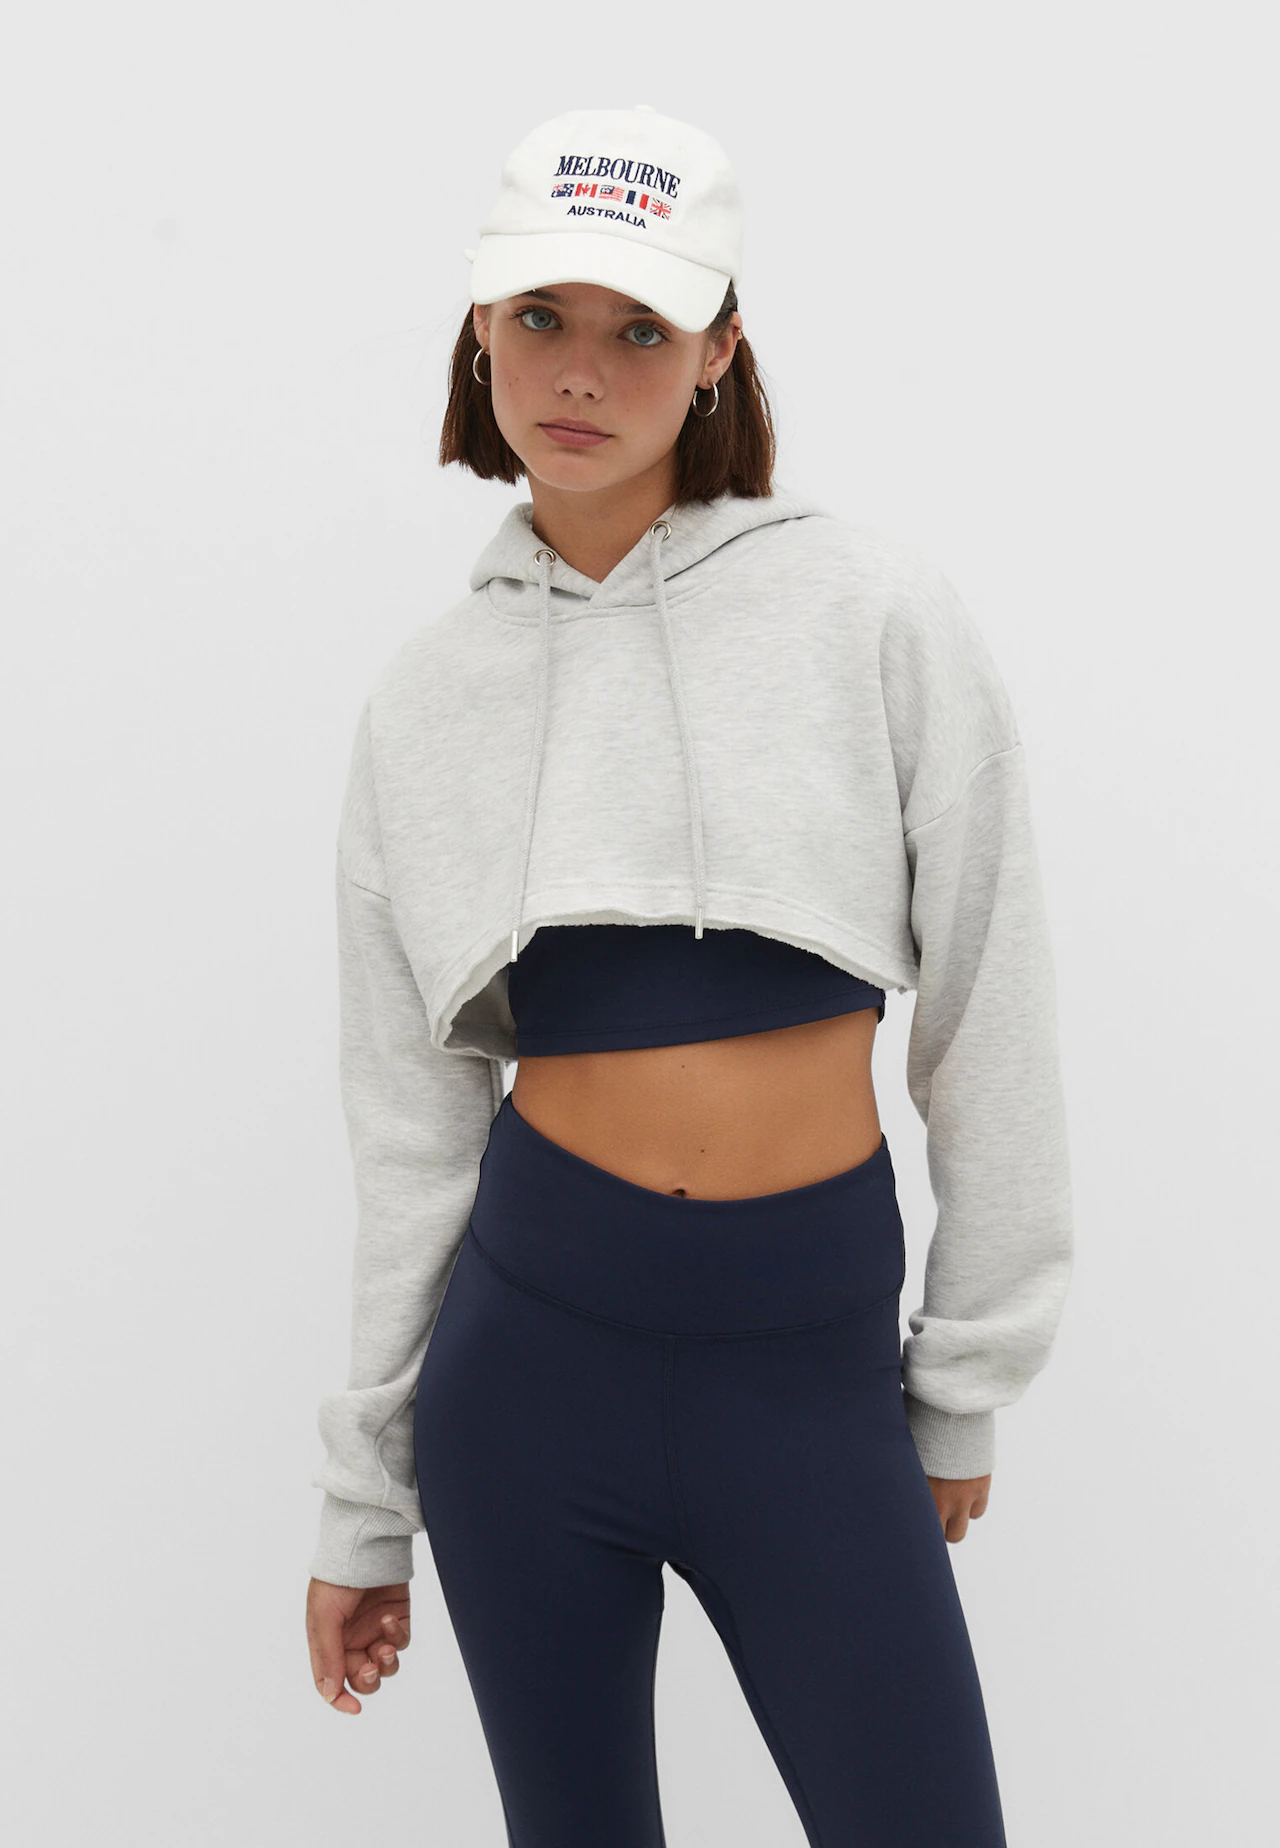 Cropped Hoodie Pullover Long Sleeve Tops Solid Color Drawstring Crop Tops  Hoodies Sweatshirts Fall Outfit Clothes